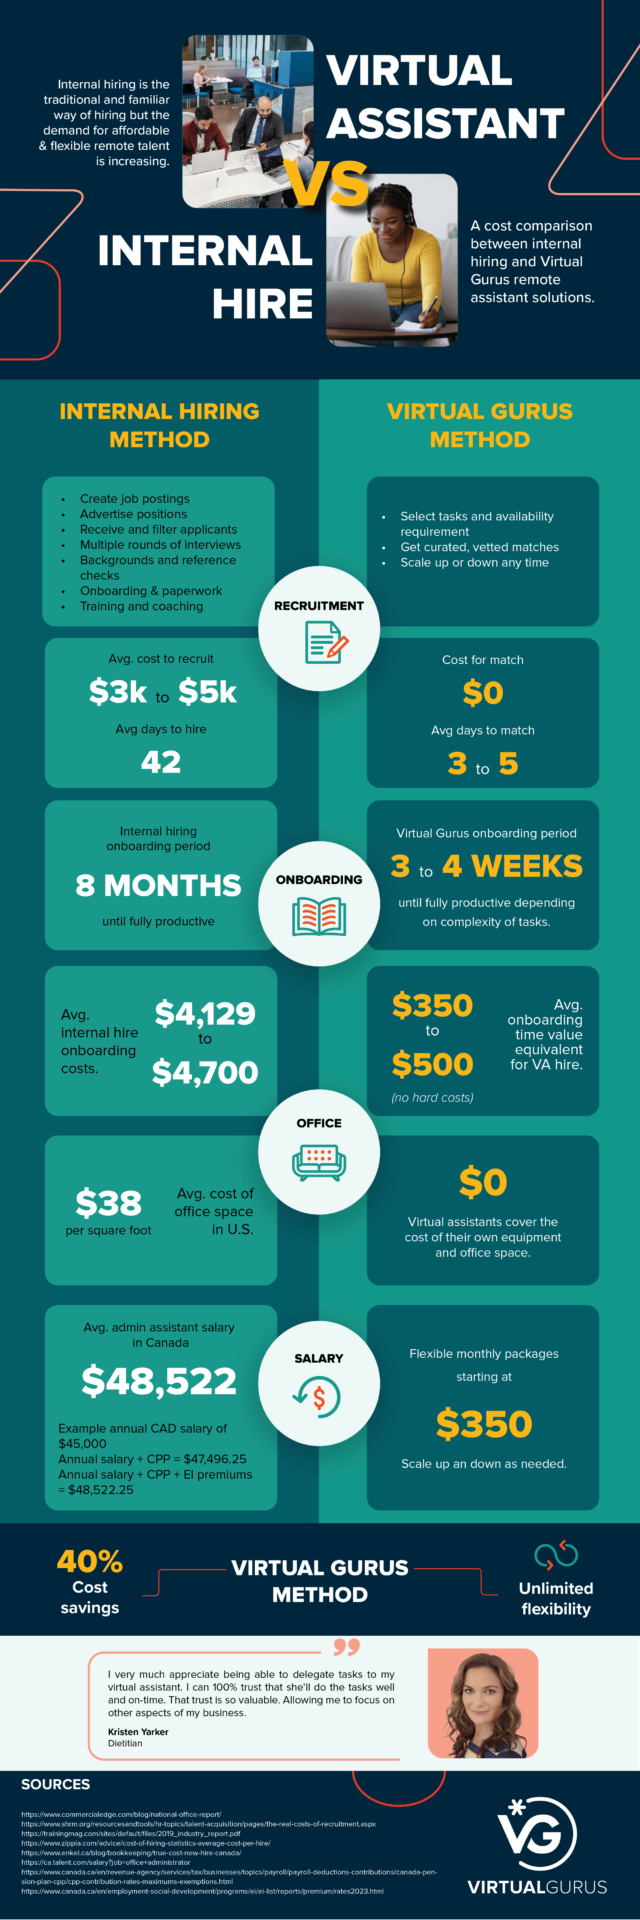 infographic explaining the cost comparison of hiring a remote worker vs an internal hire and how remote workers are more cost effective.